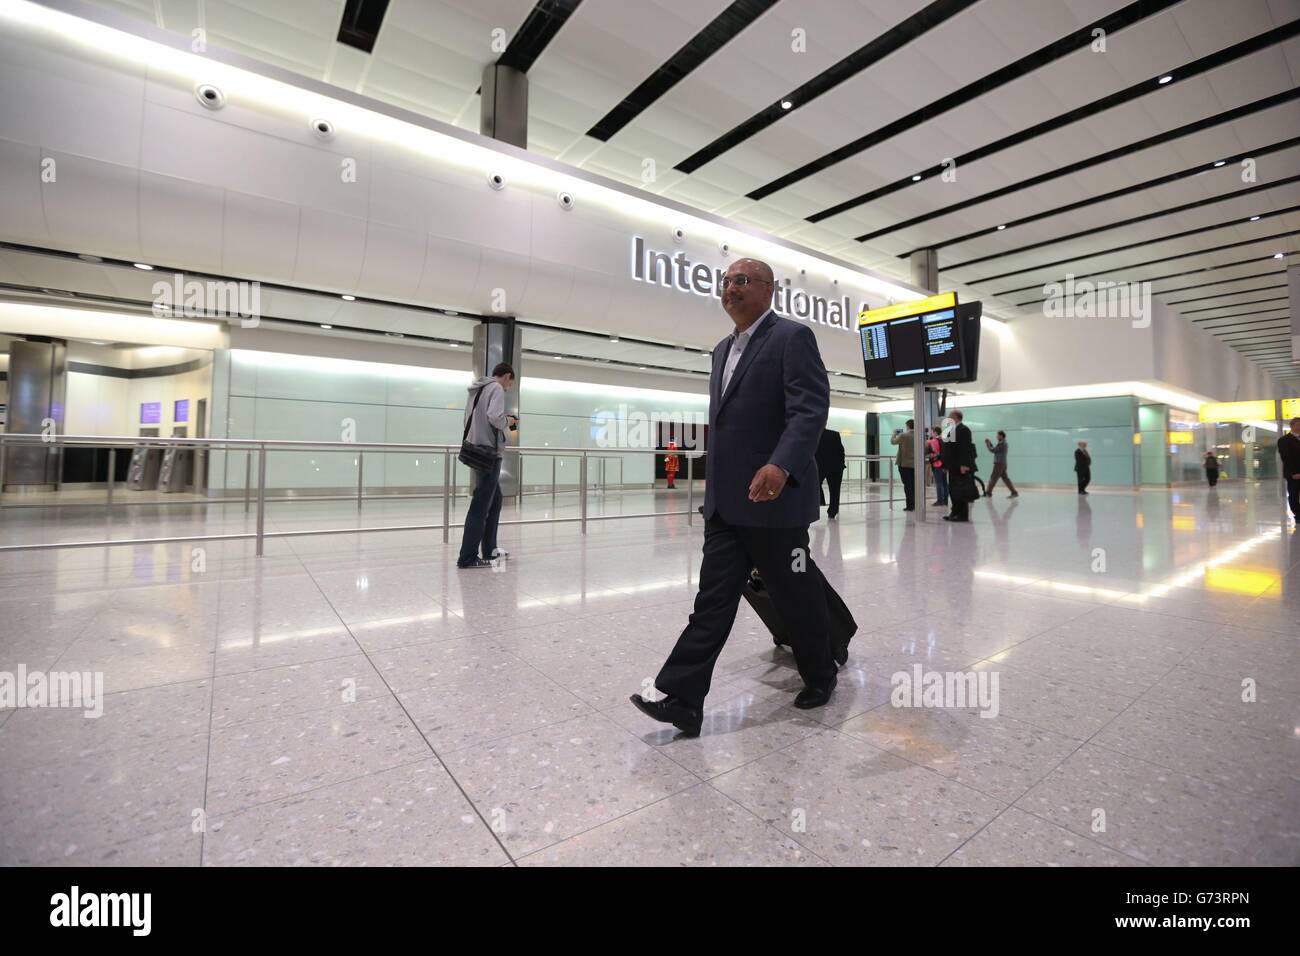 One of the first passengers to arrive at Heathrow's Terminal 2, the Queen's Terminal, Mohan Rao walks through the terminal building. Stock Photo